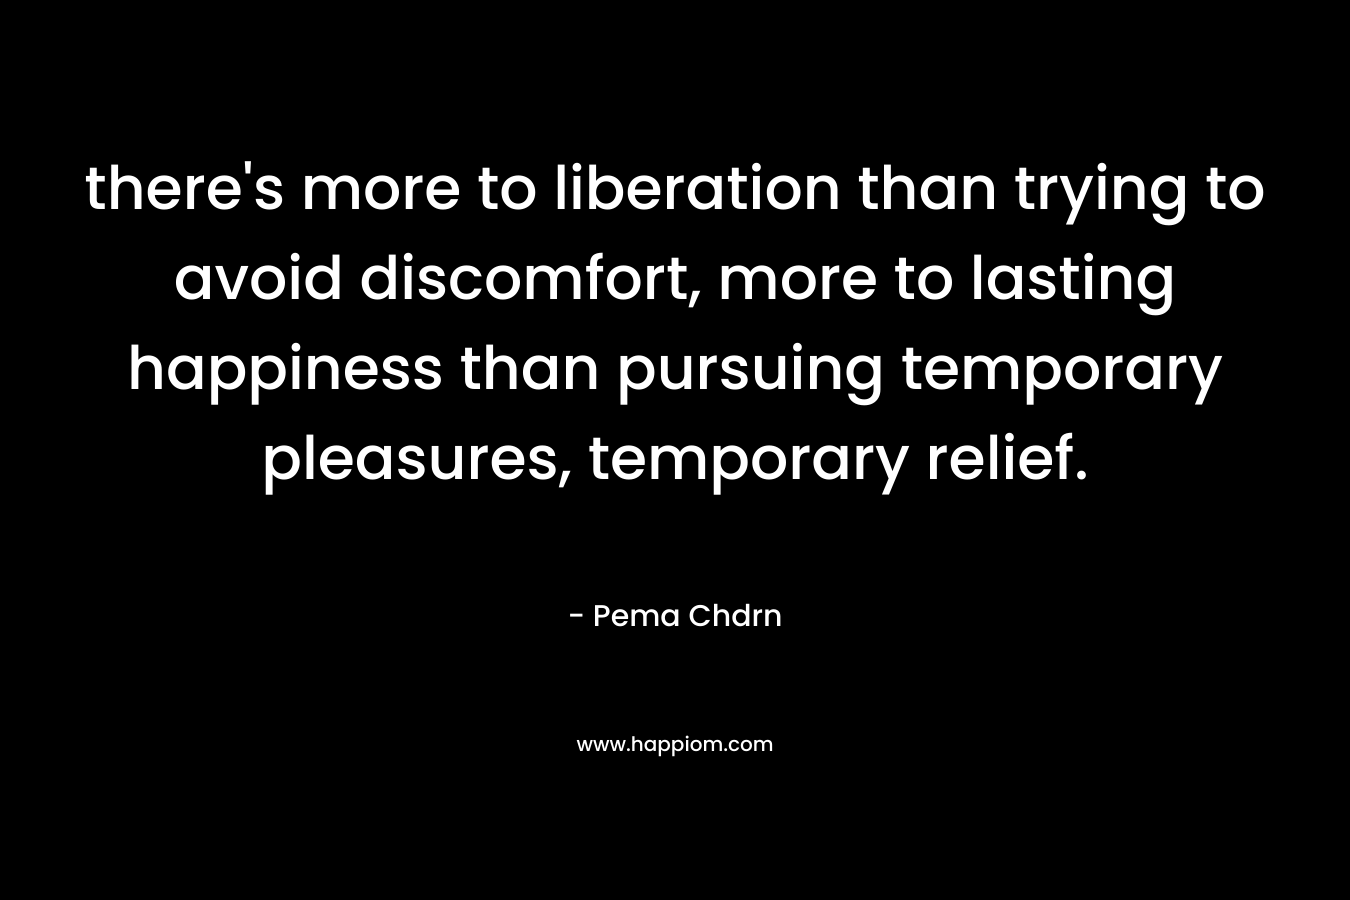 there’s more to liberation than trying to avoid discomfort, more to lasting happiness than pursuing temporary pleasures, temporary relief. – Pema Chdrn